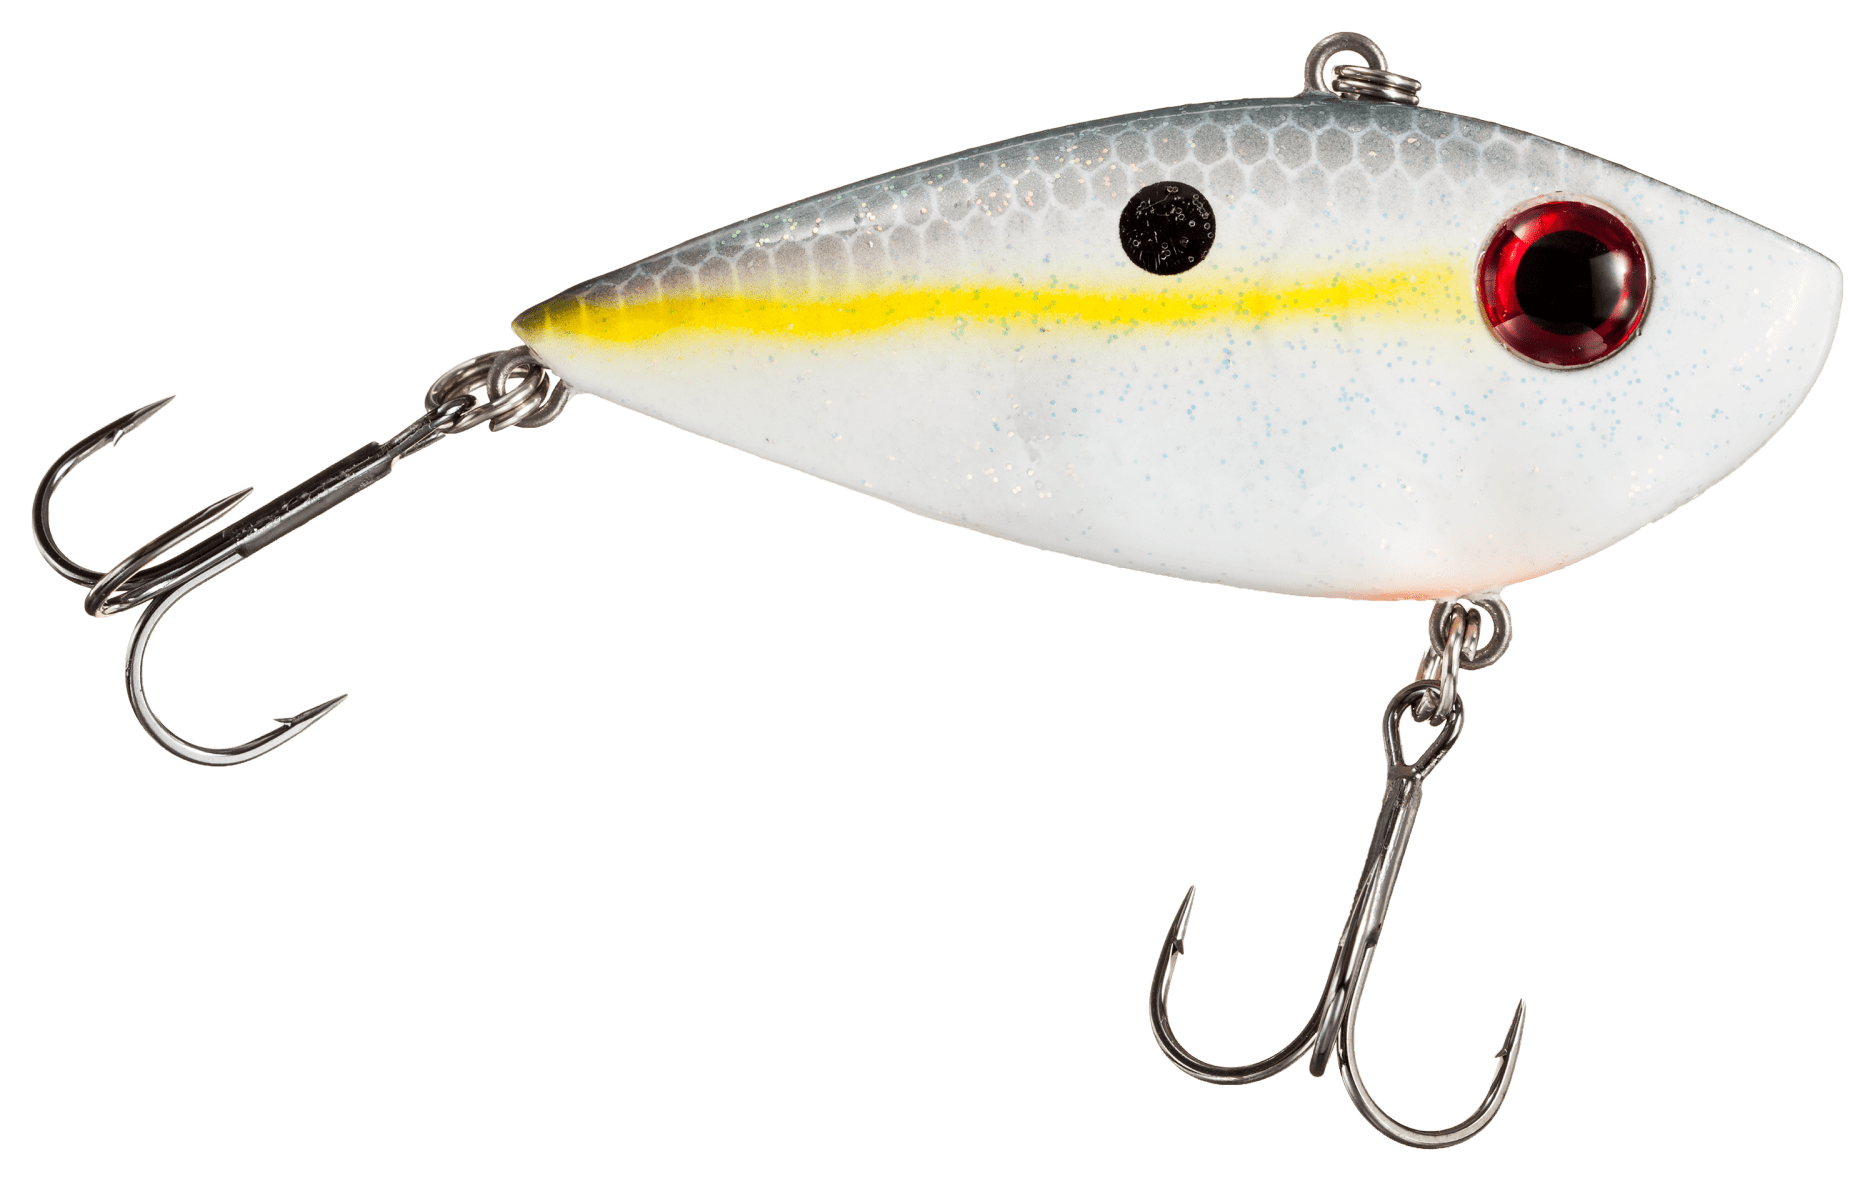 Cotton Cordell Super Spot Rattle Lipless Lure Royal Red 1/2oz